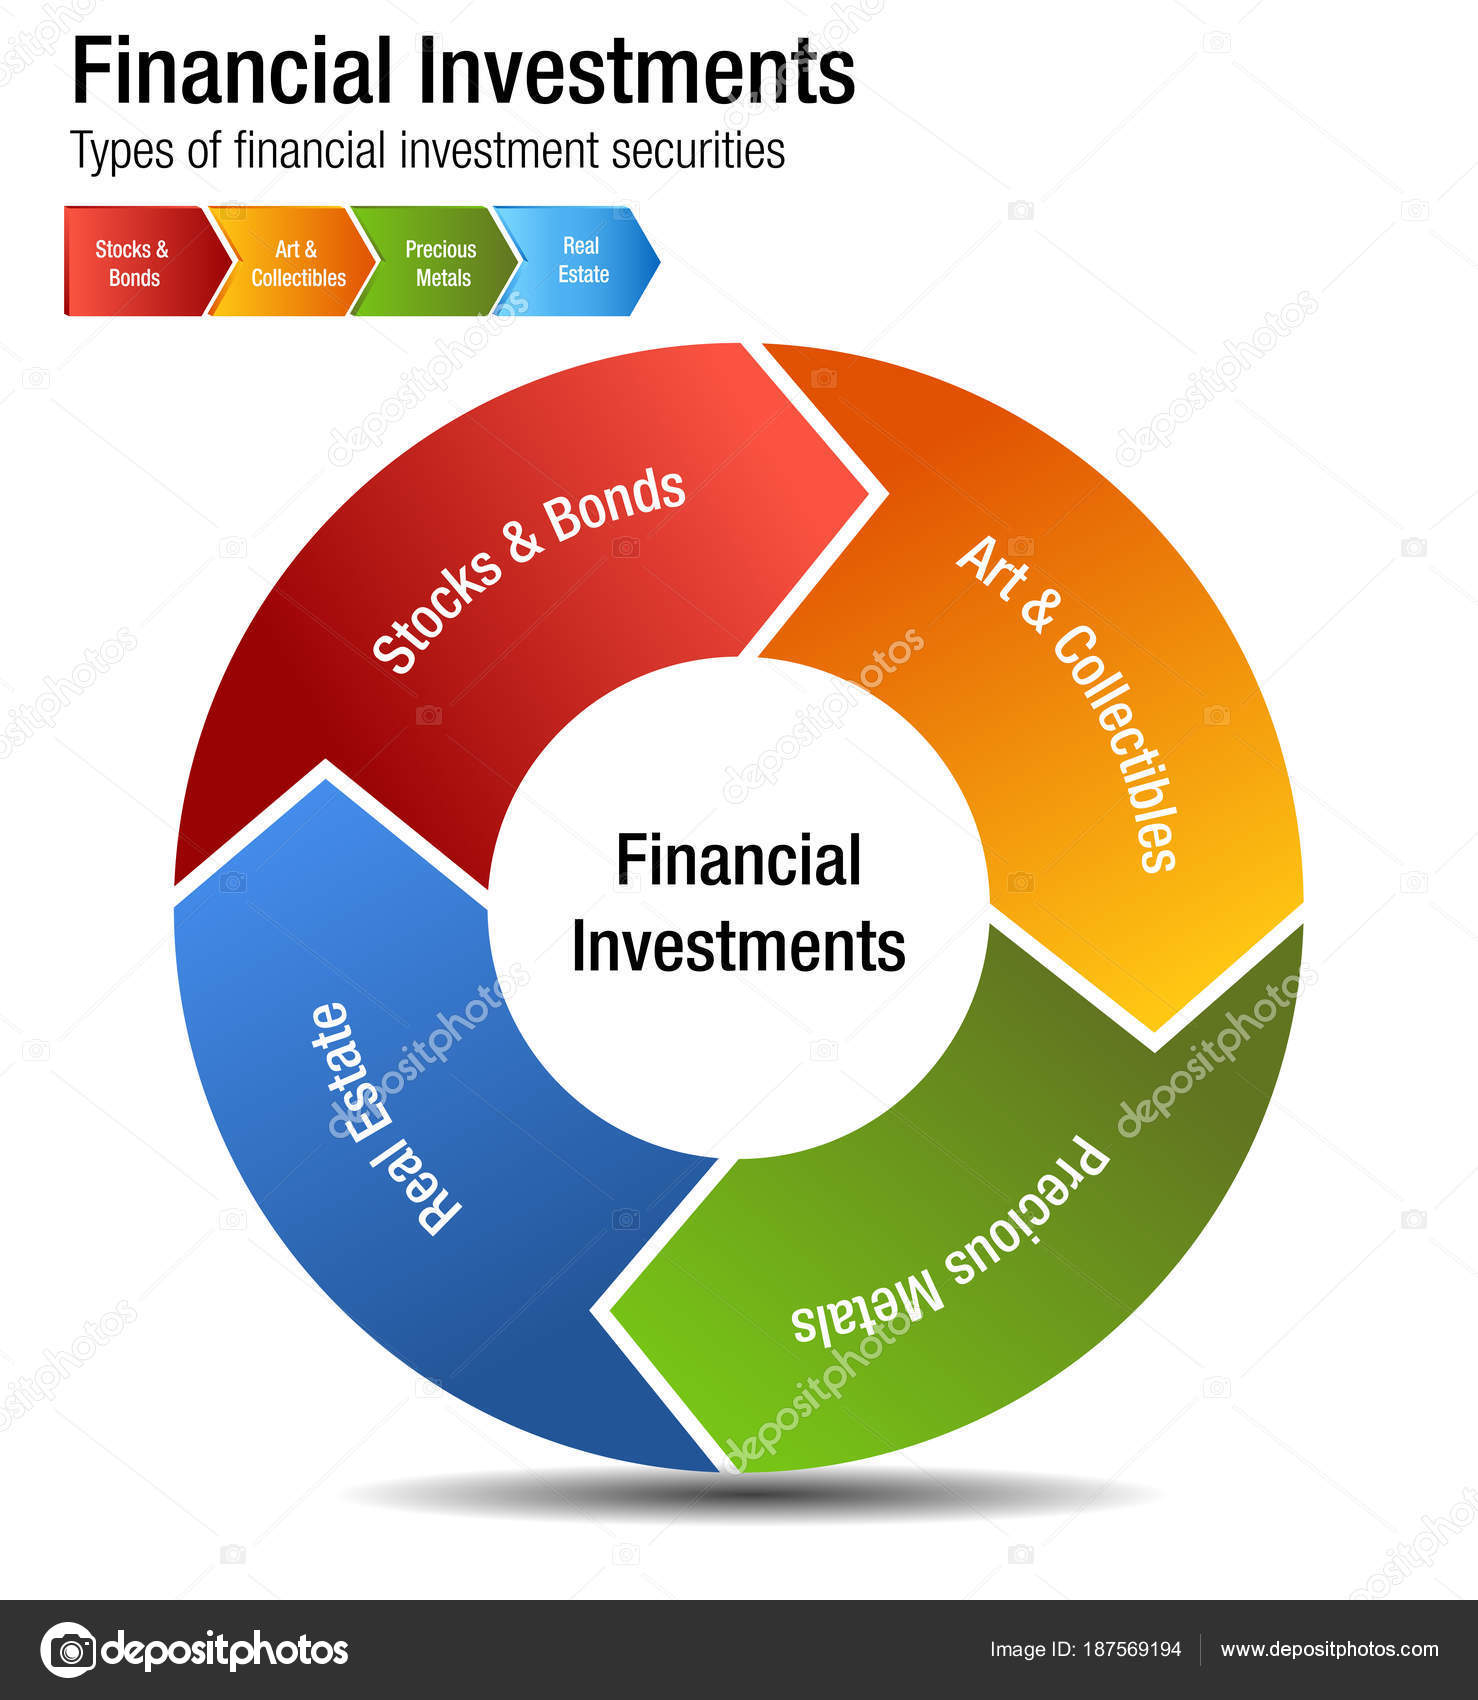 Financial Investments Types Stocks Bonds Metal Real Estate